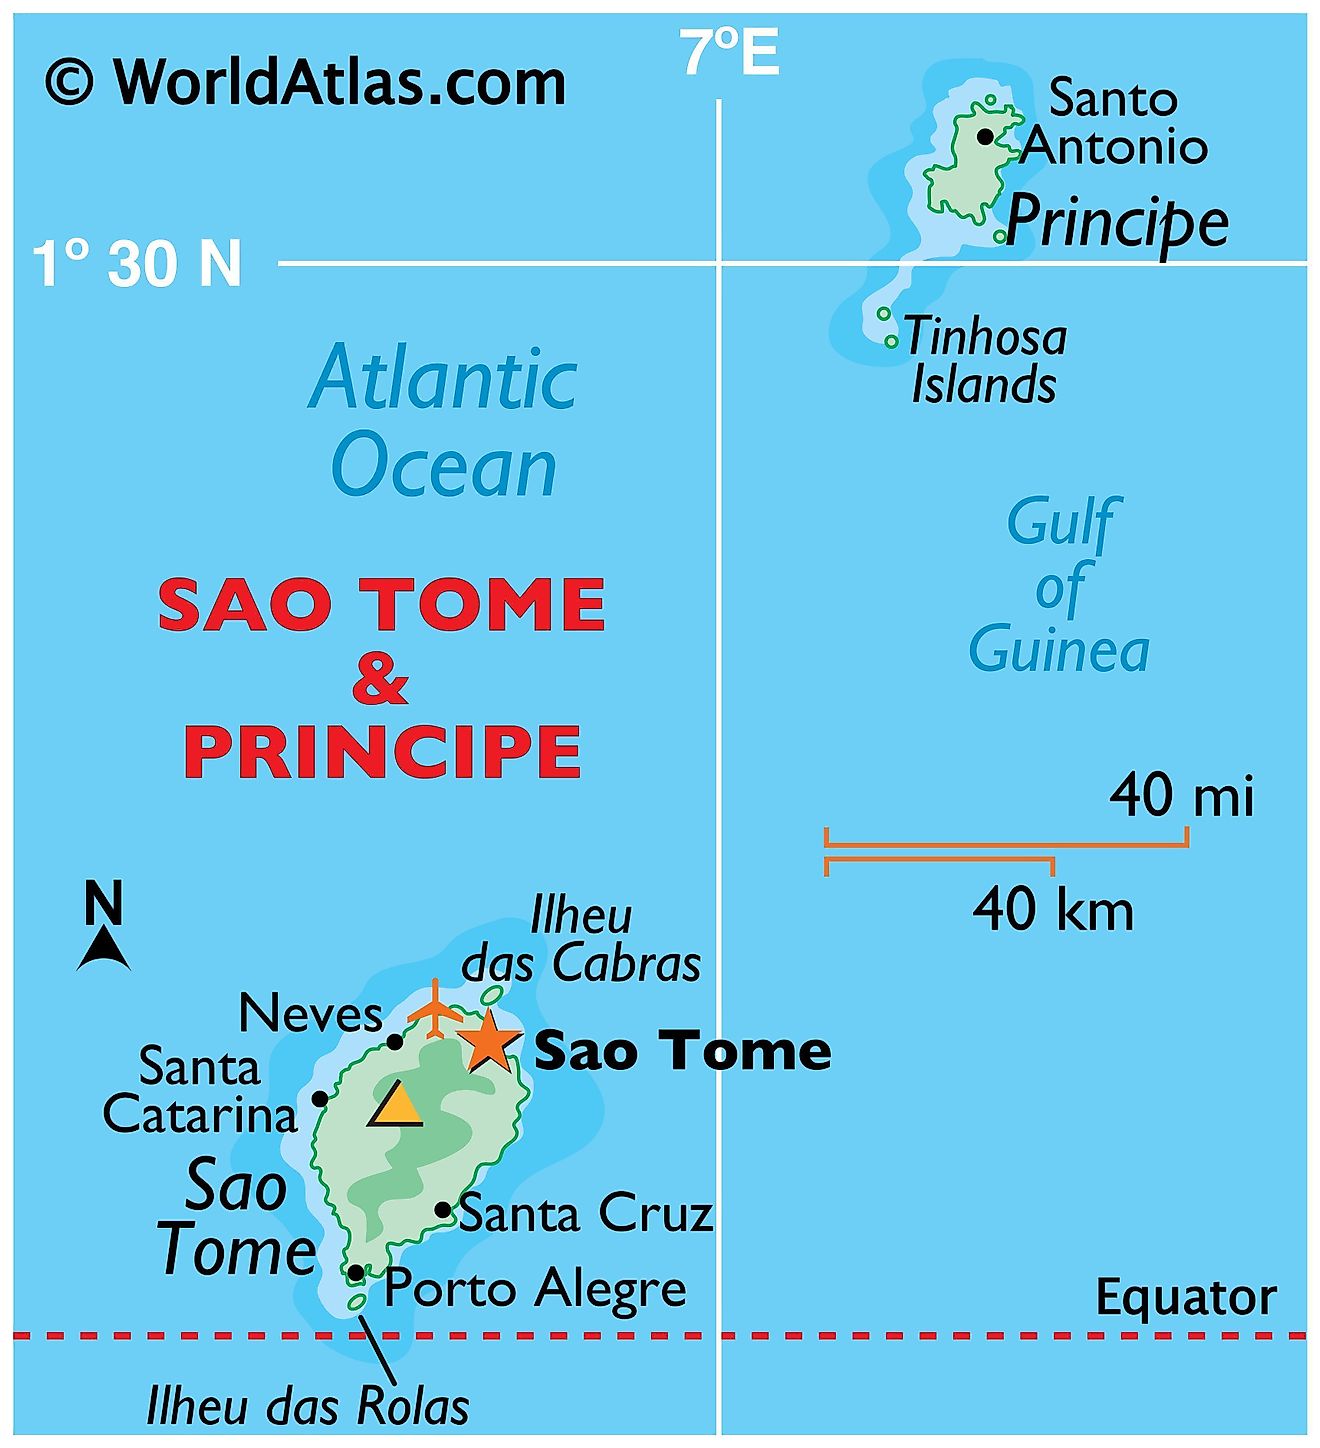 Physical map of Sao Tome and Principe showing its major islands, surrounding water bodies, relief, and relative location of major cities.